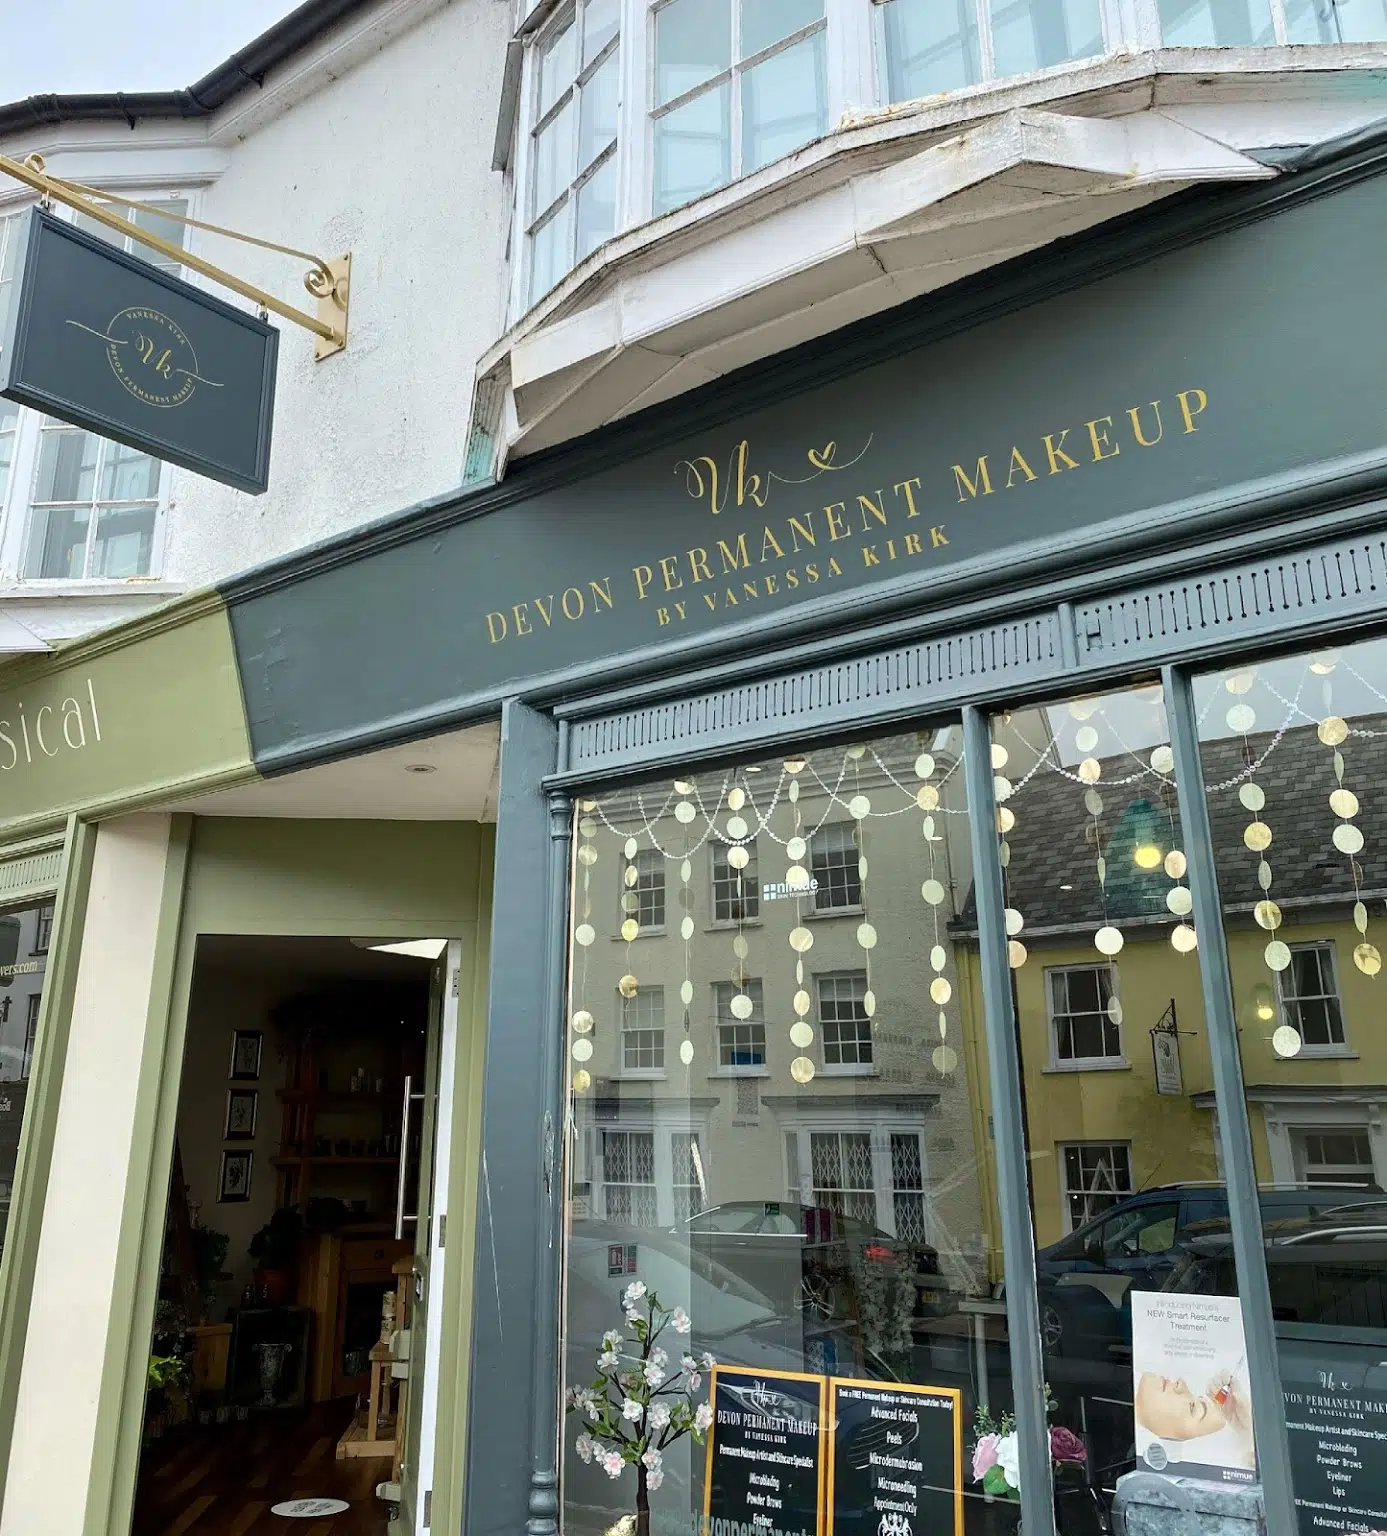 Outdoor shop sign fascia for Devon Permanent Makeup by Nettl of Exeter